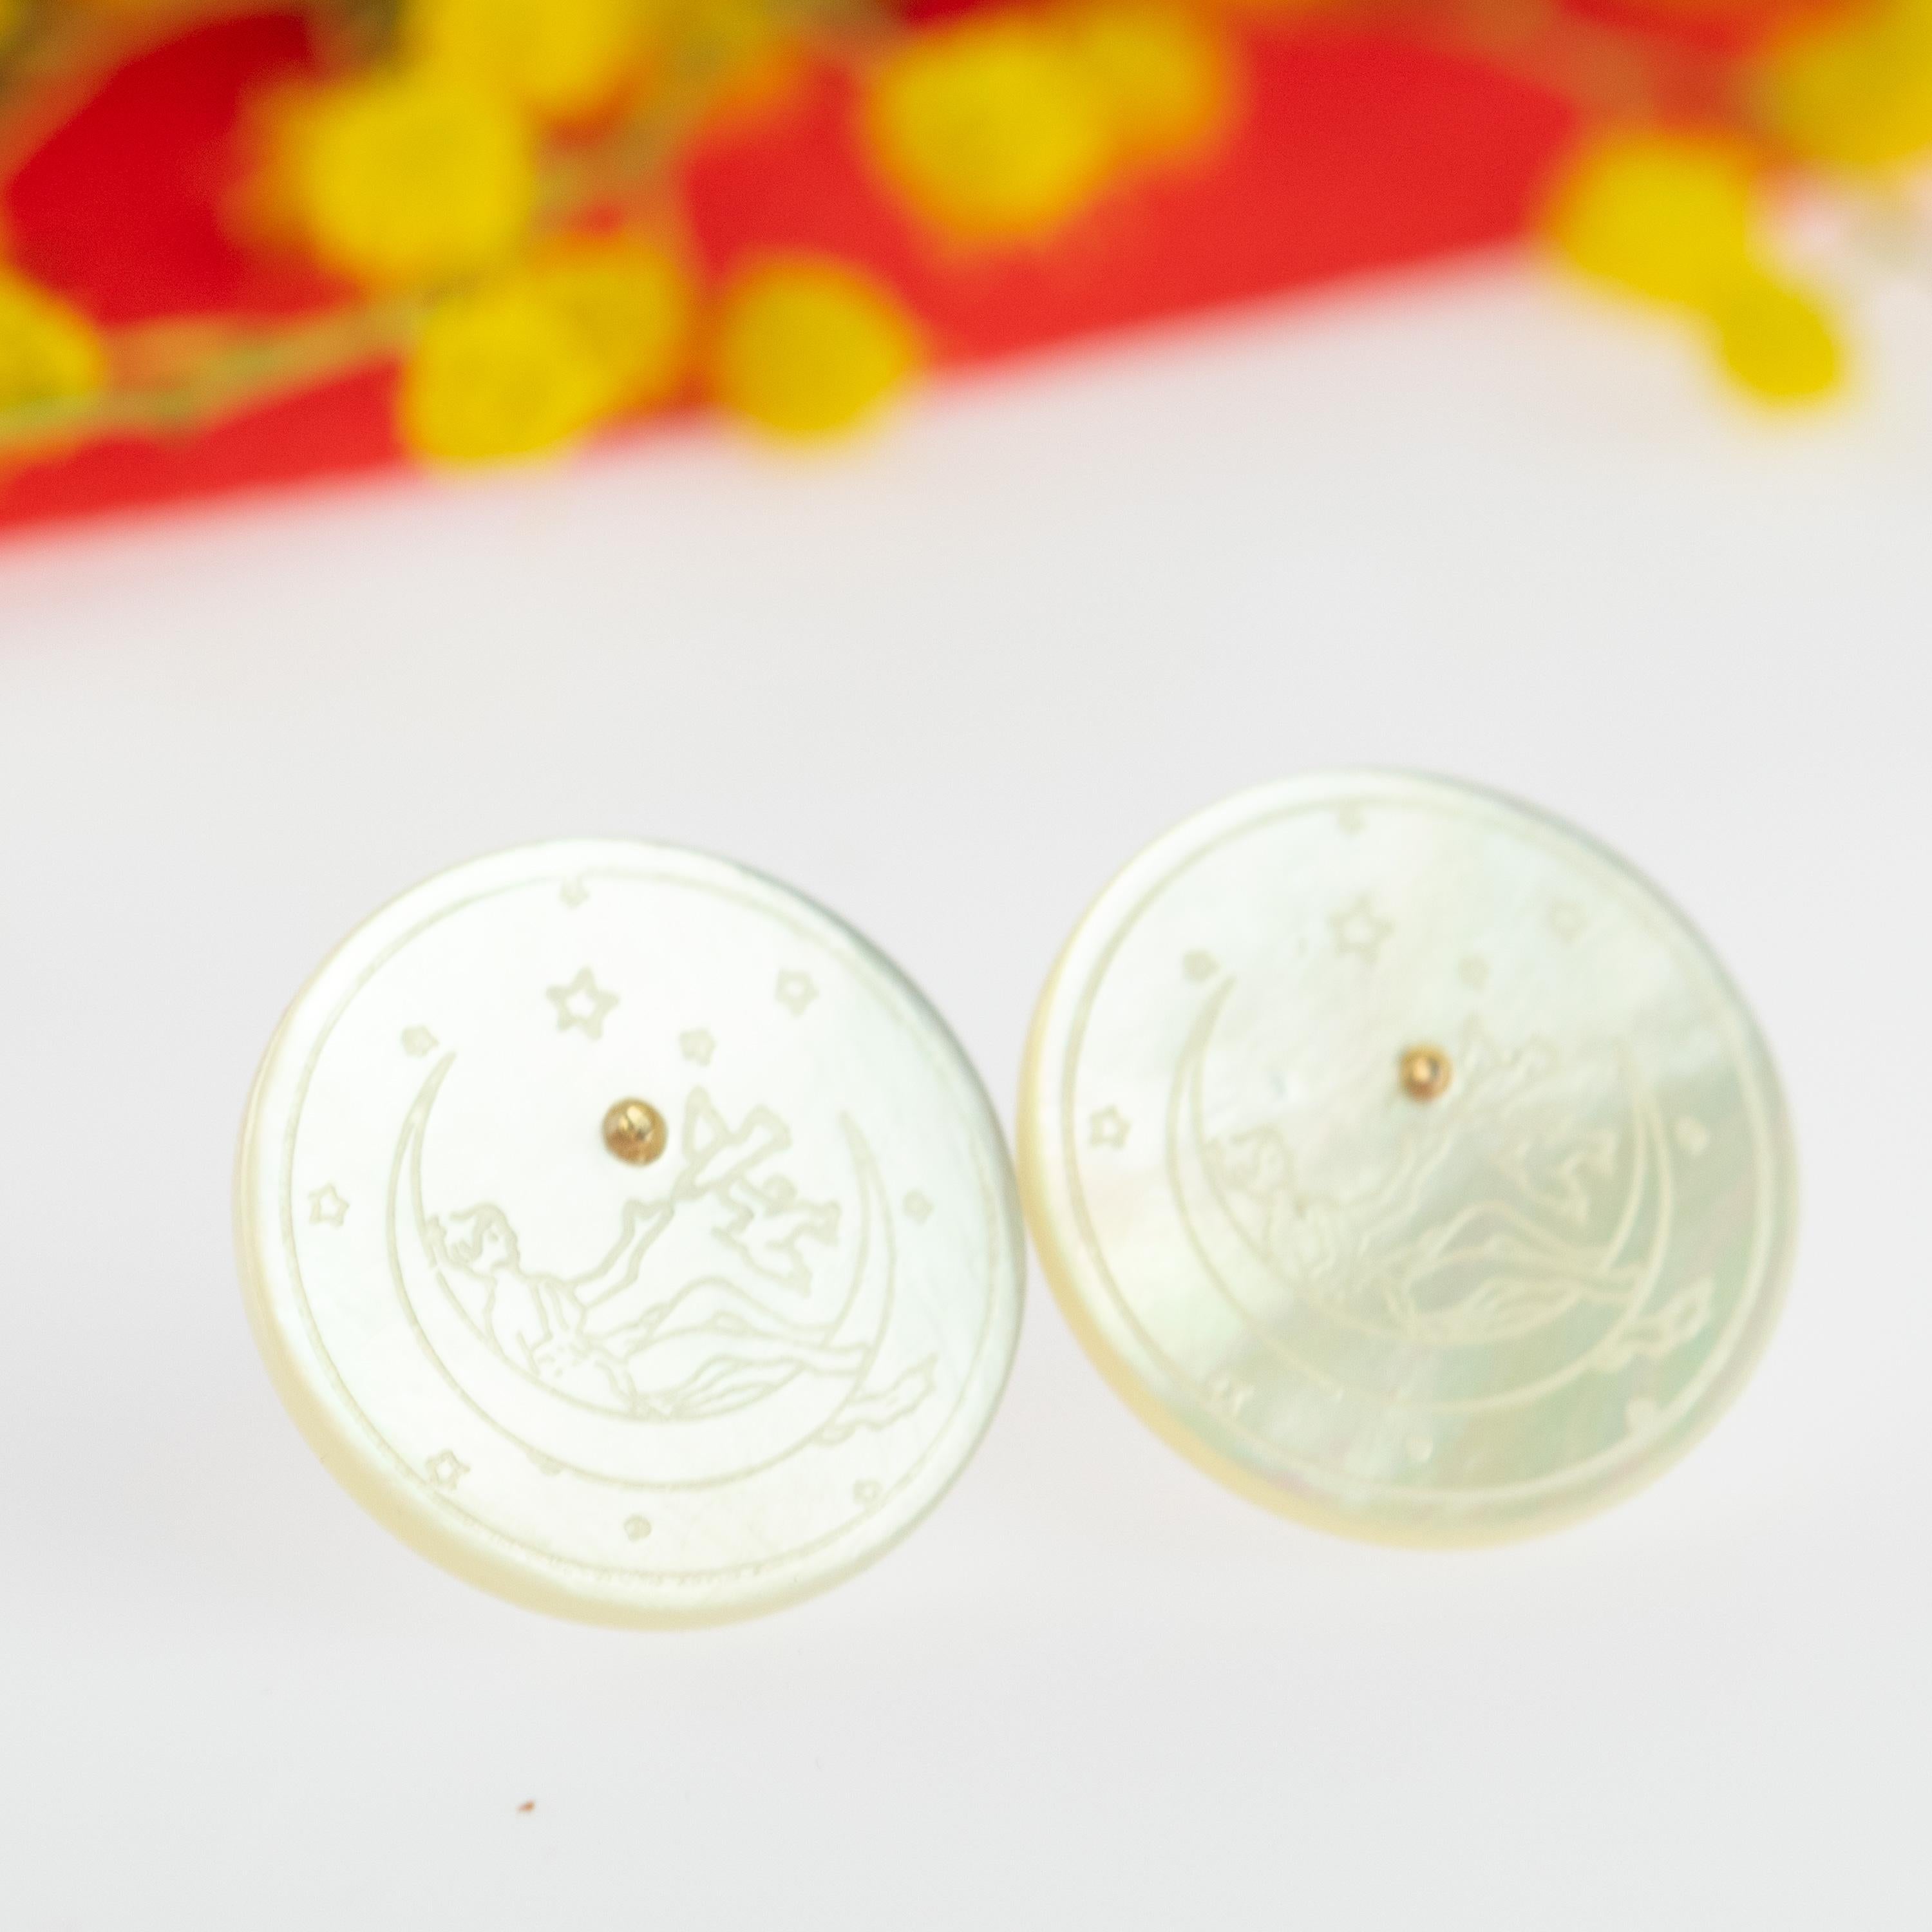 Unique angel carved coins in top quality Mother of Pearl for a signature INTINI Jewels look. A carved design with a mystic goddess representing the asian myths and spring tales. Romantic stud earrings for a marvelous look, for a gift of class and